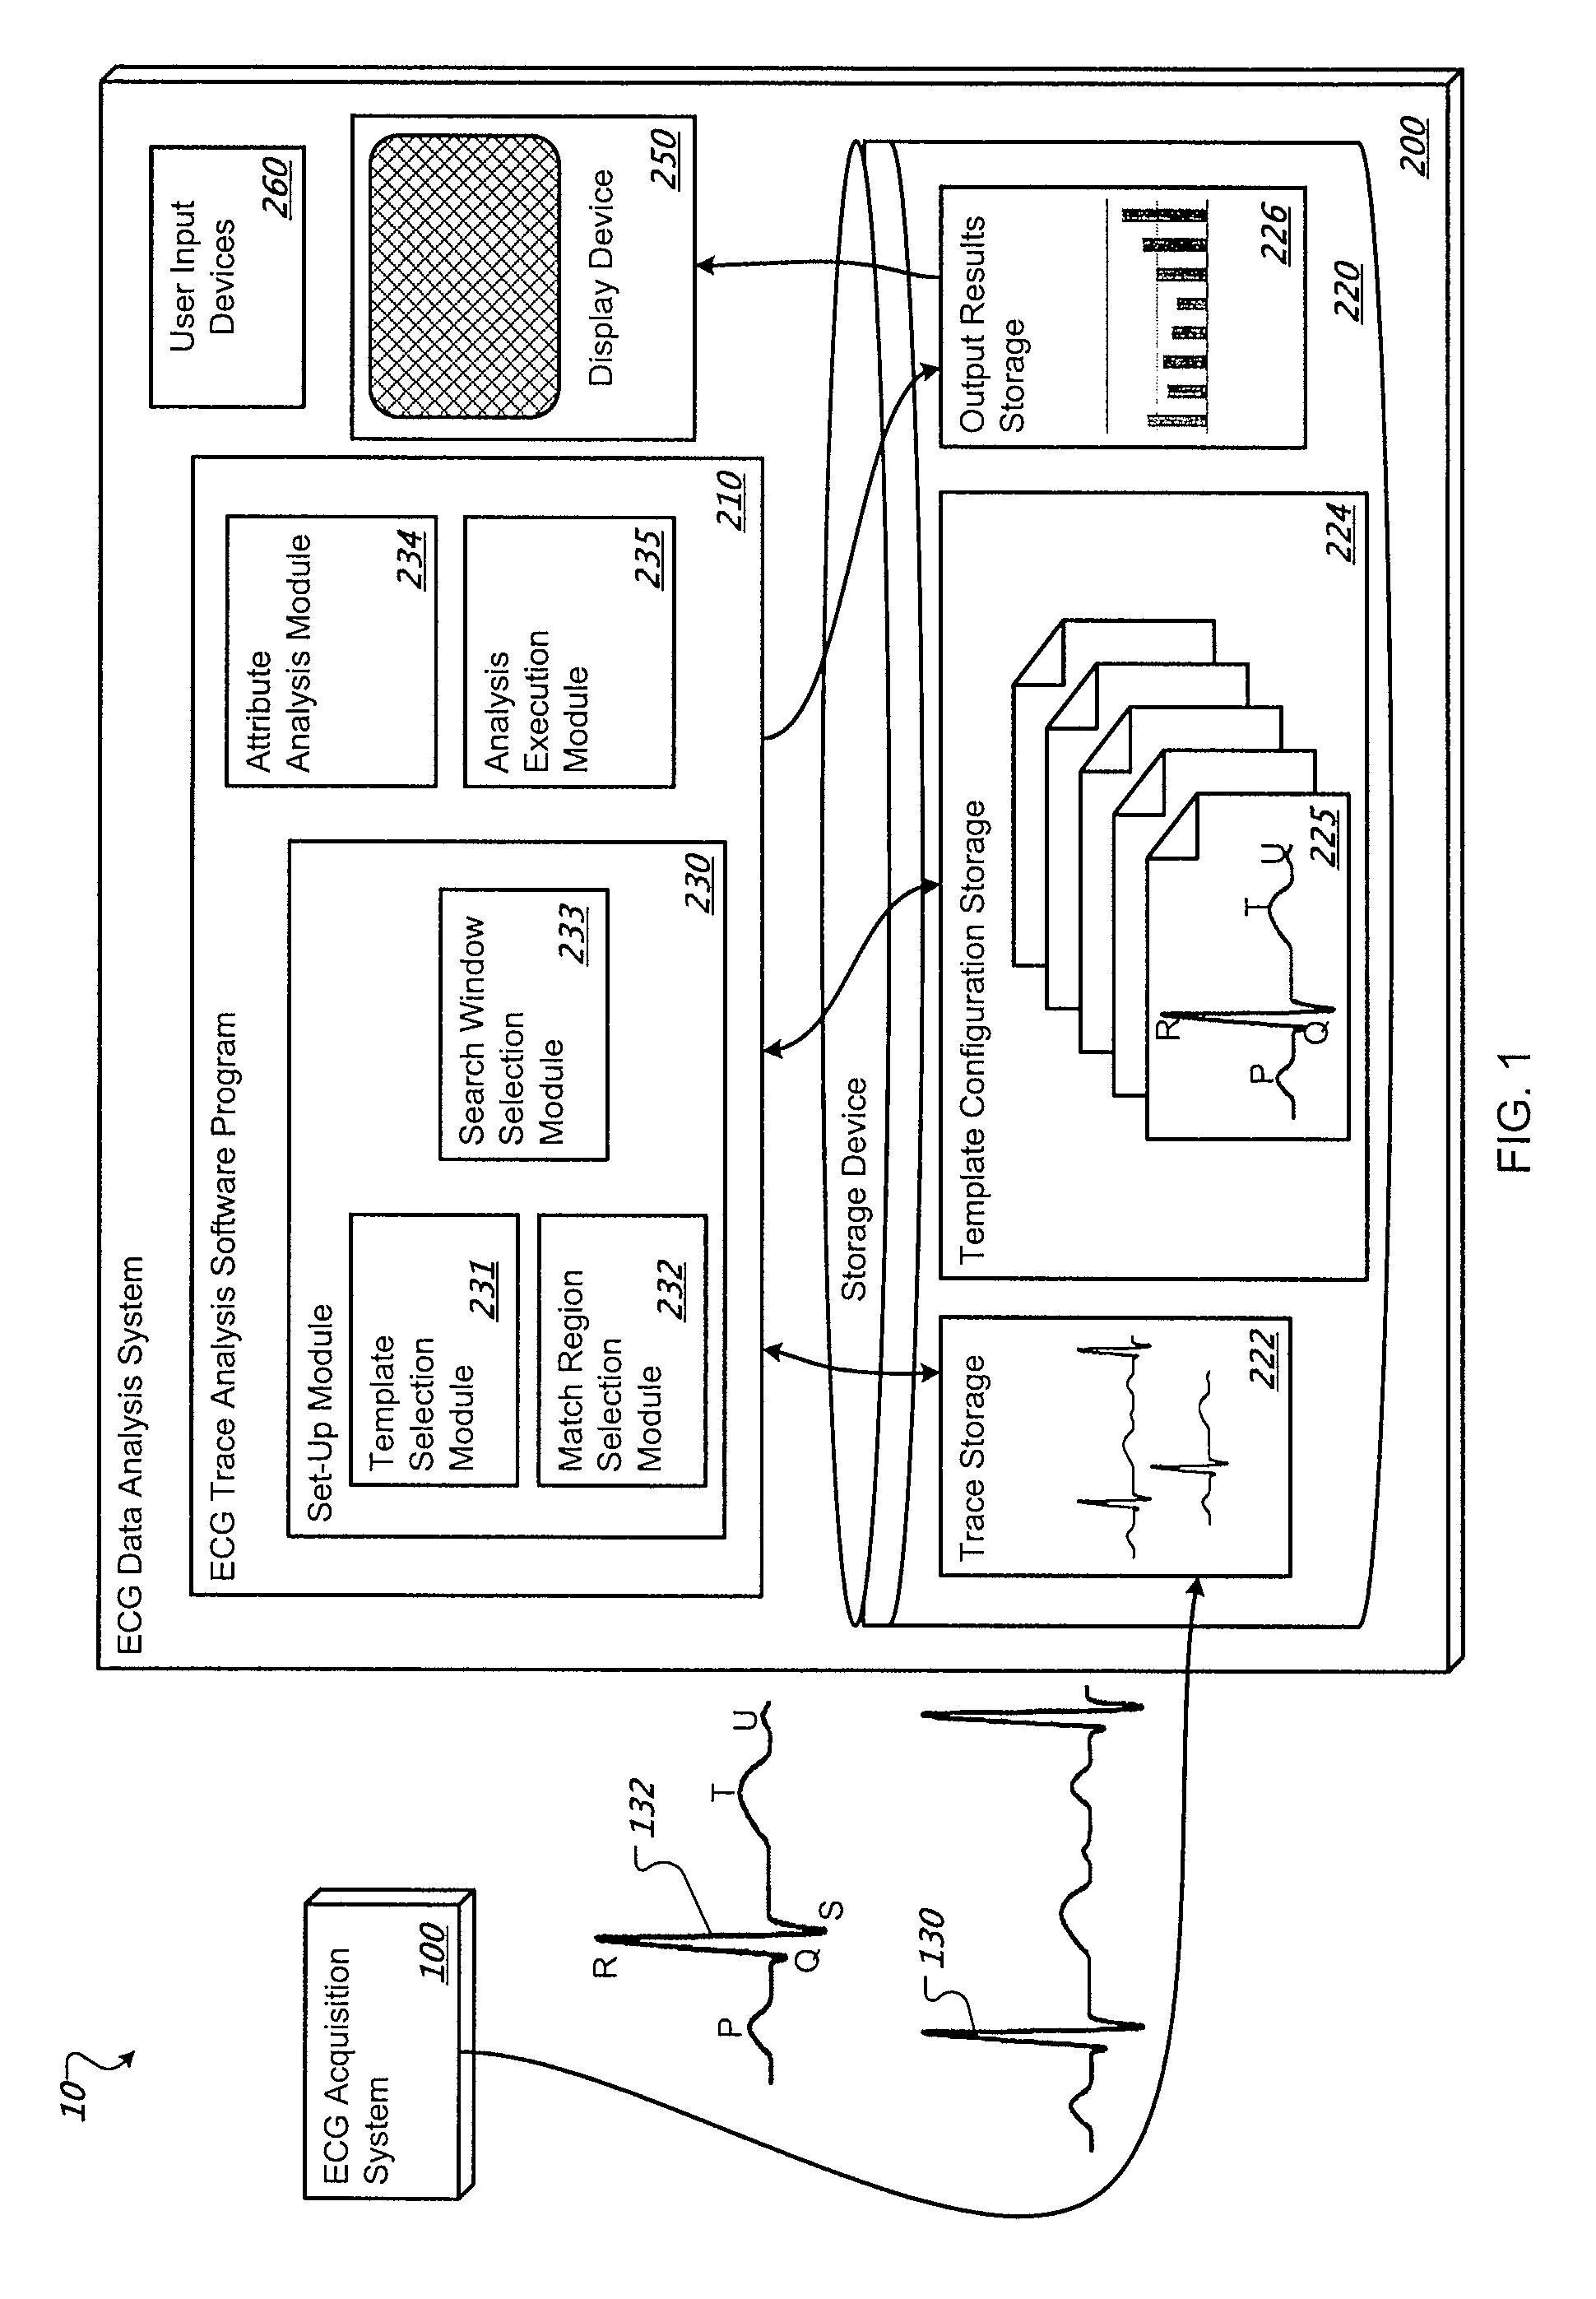 Electrocardiographic (ECG) Data Analysis Systems and Methods